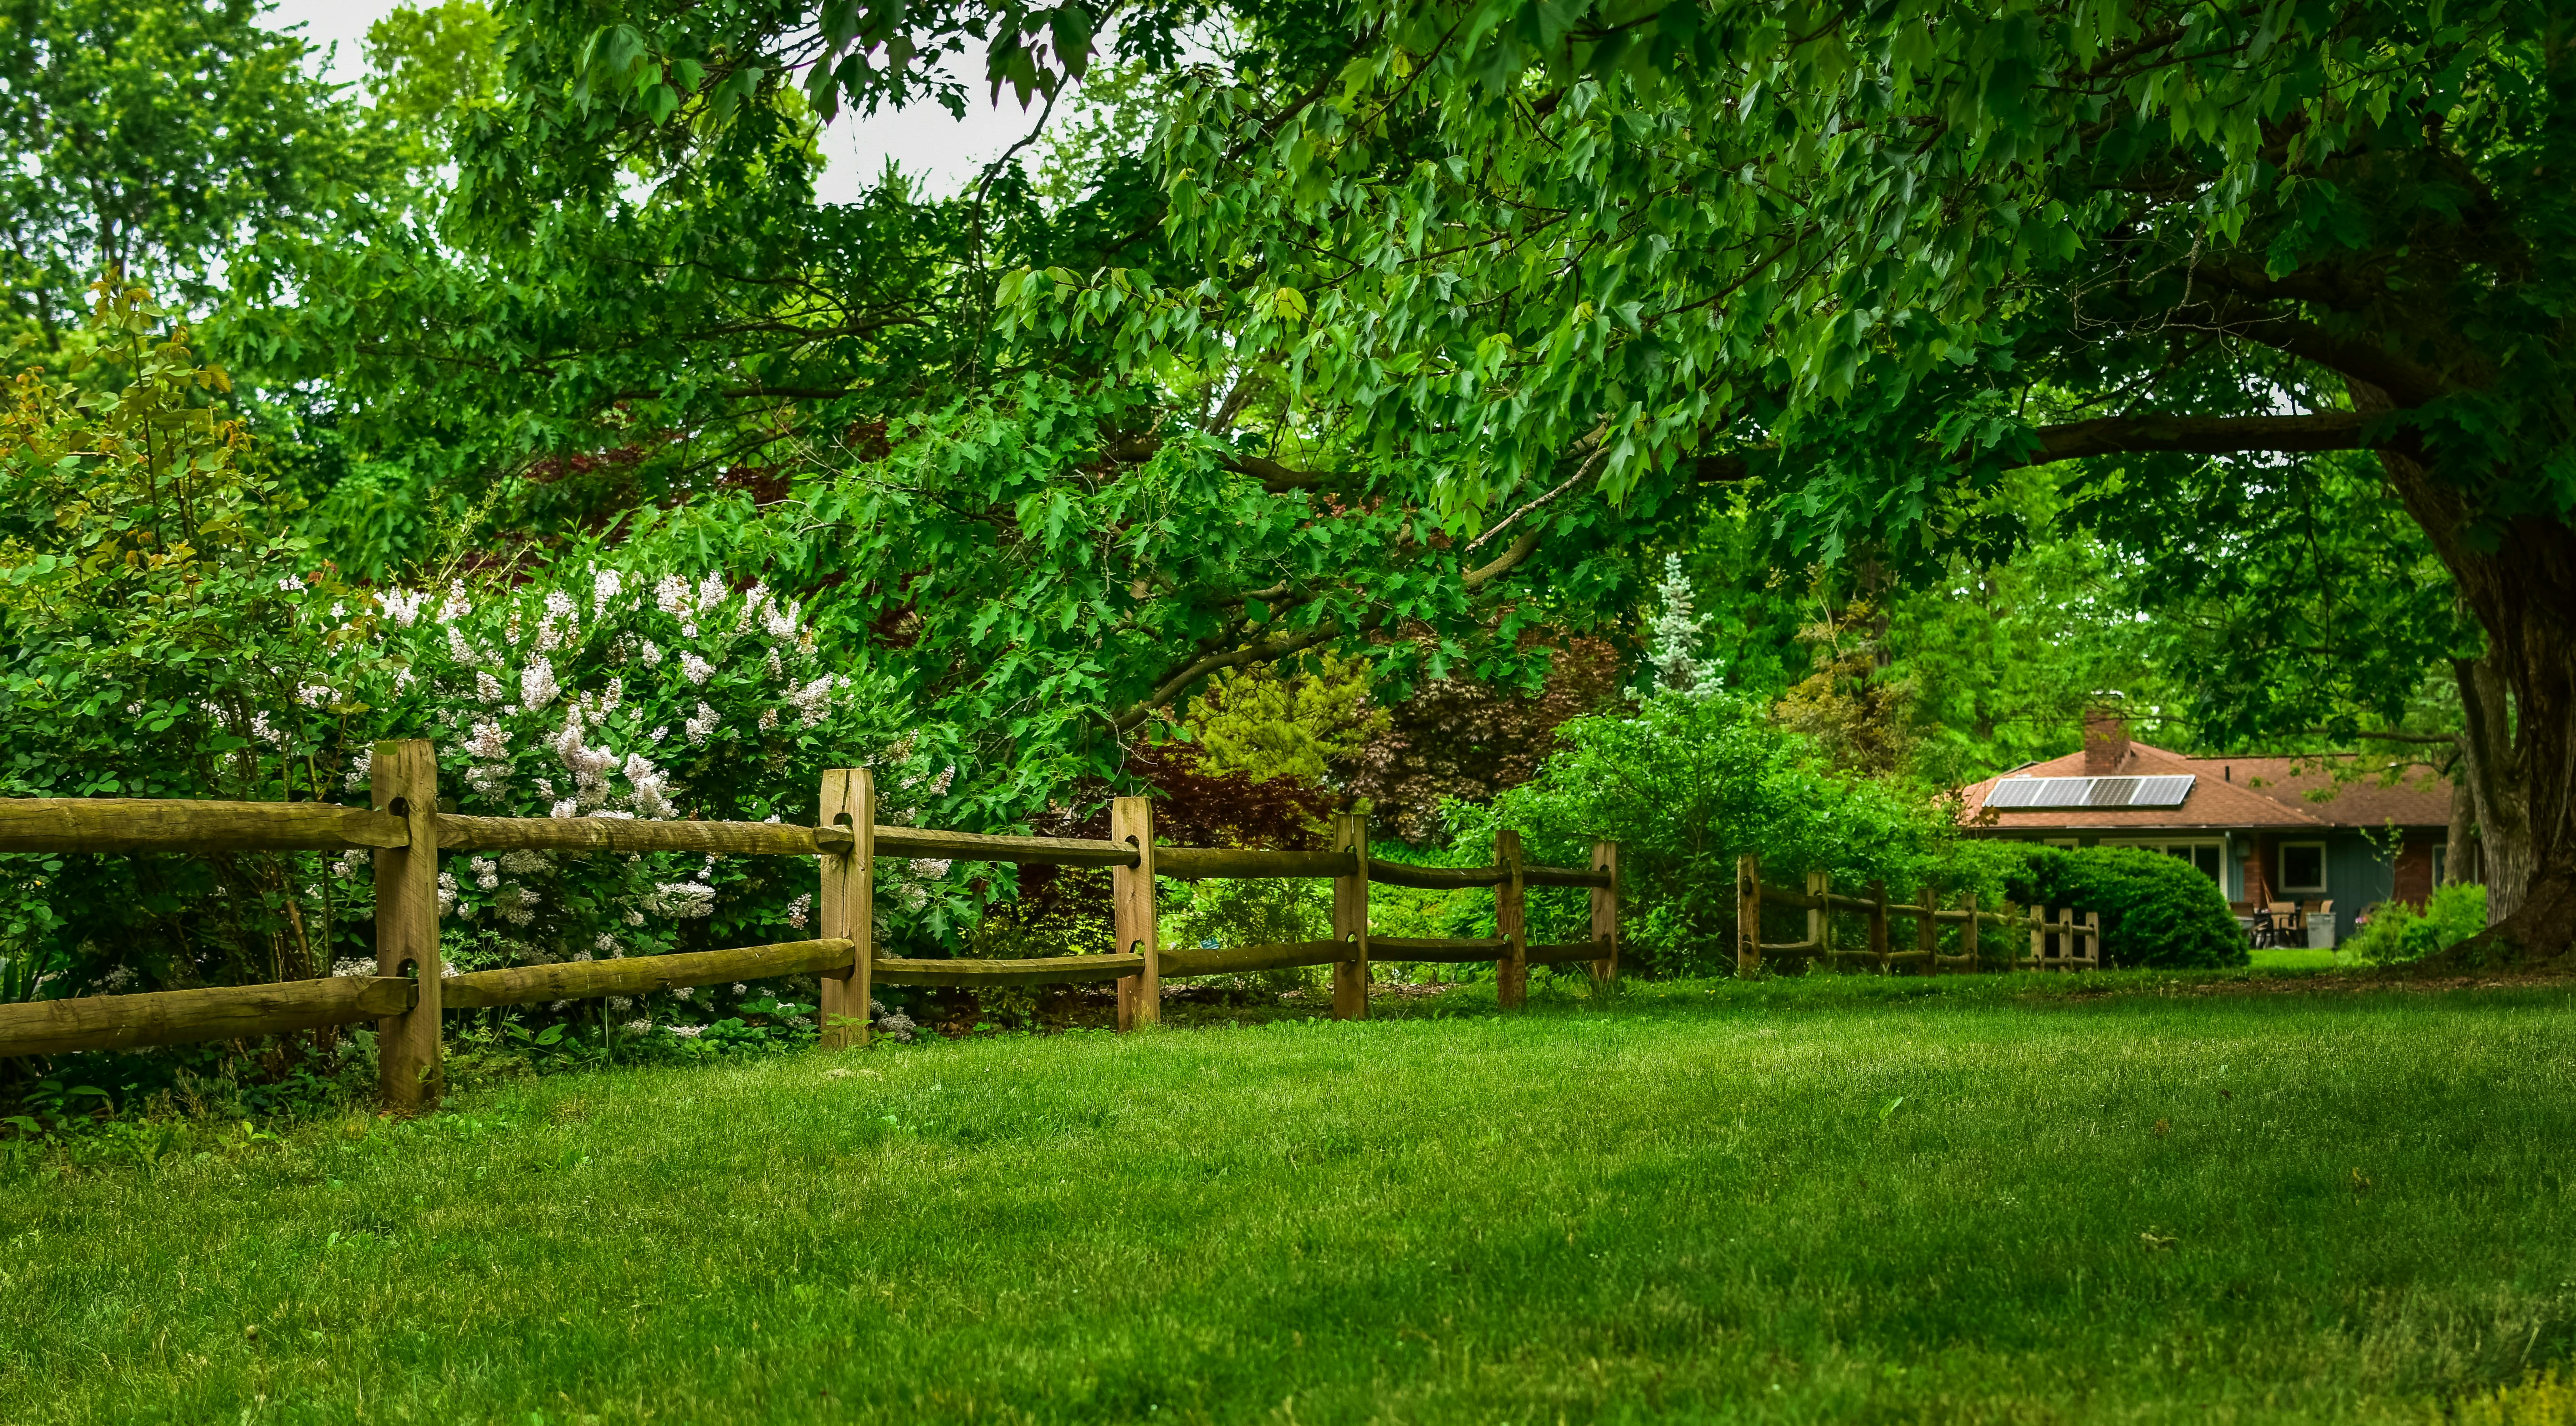 Grass field with wooden fence | Source: Pexels